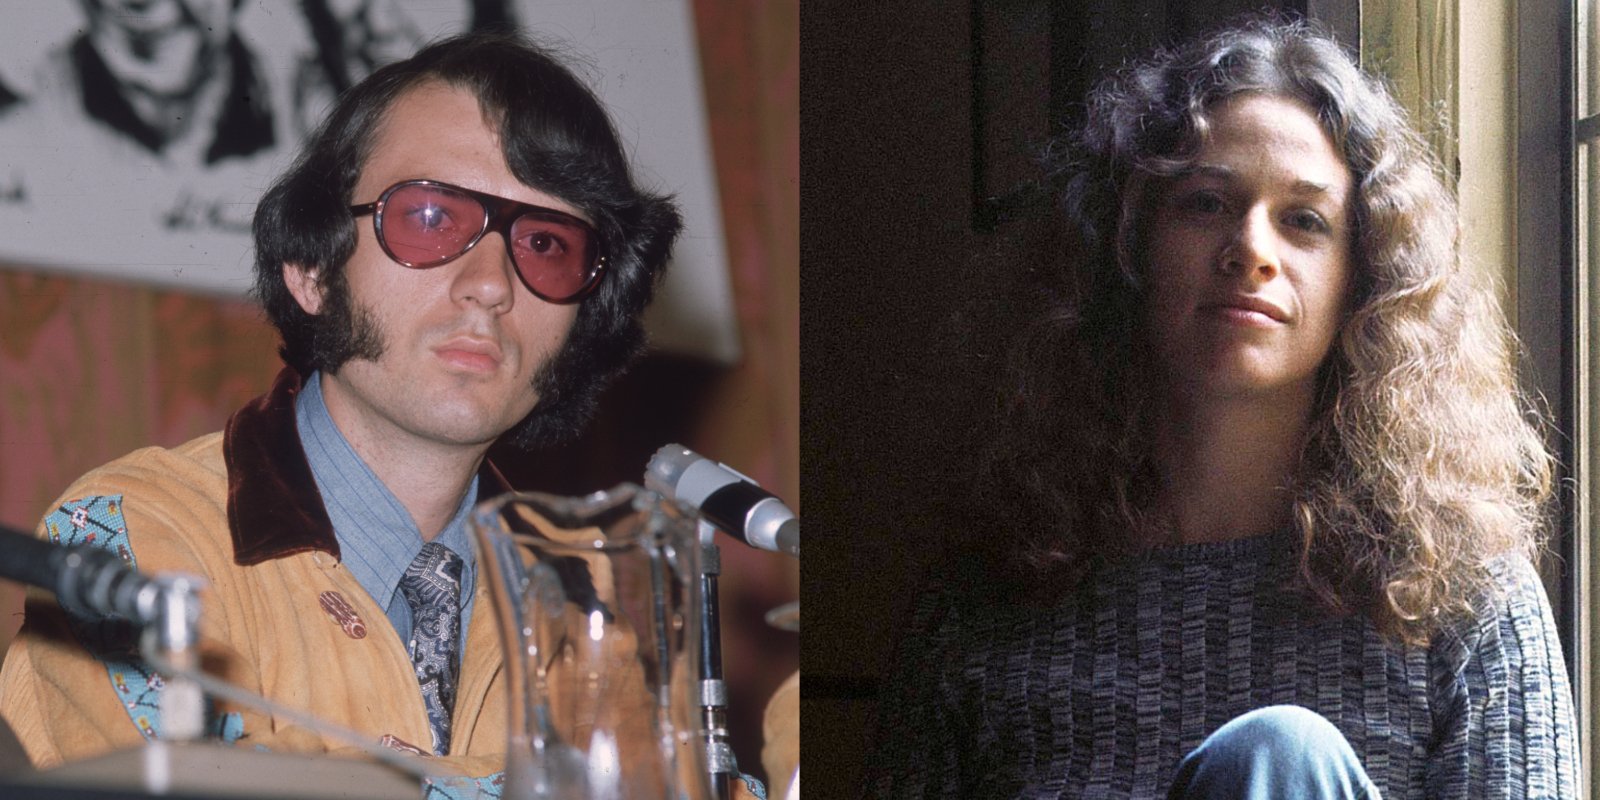 Mike Nesmith and Carole King collaborated on several Monkees hits, seen here in side-by-side photos.